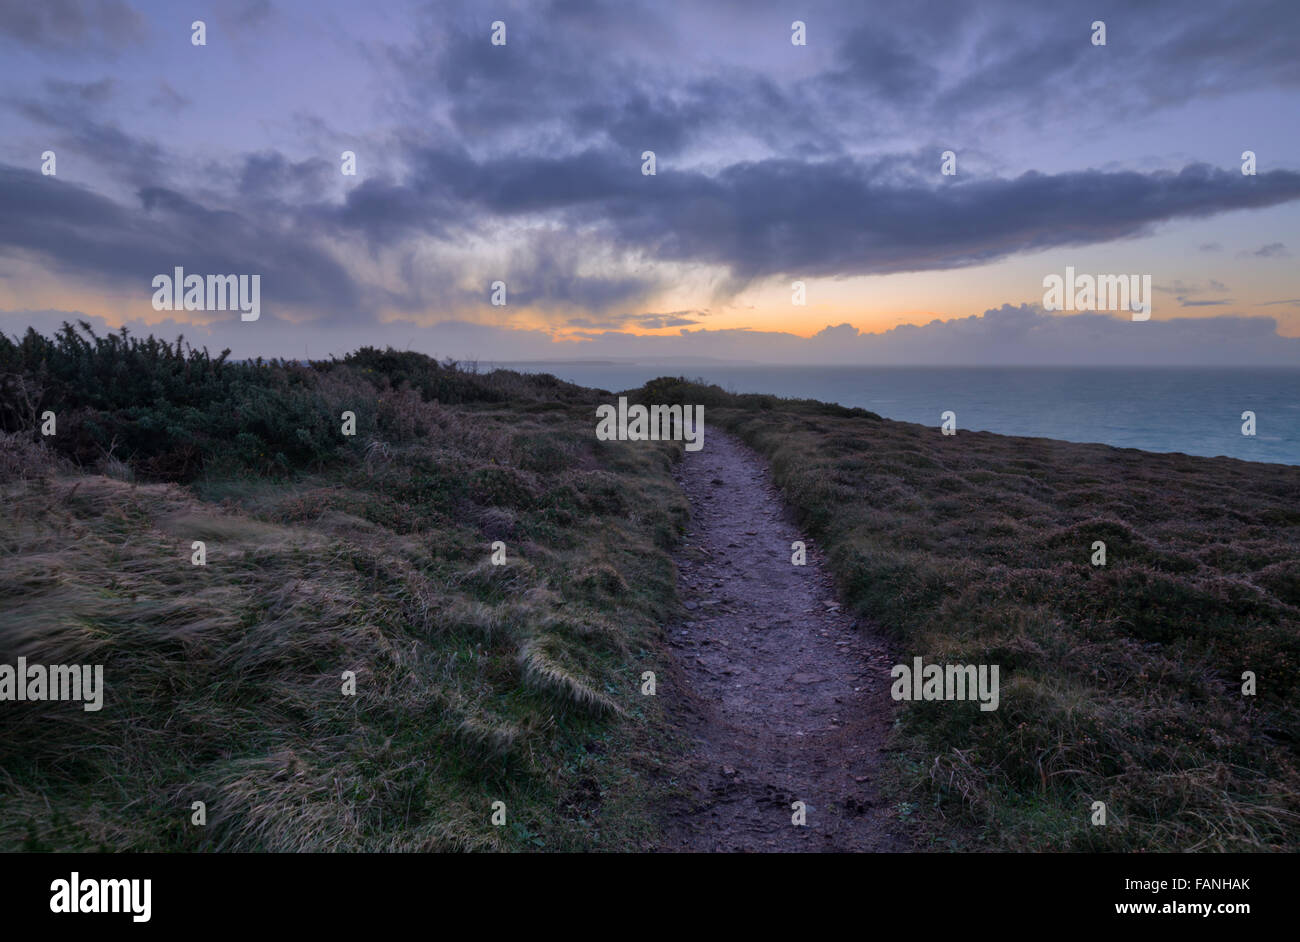 Dusk at st agnes head in north cornwall, closing scenes of poldark filmed here Stock Photo